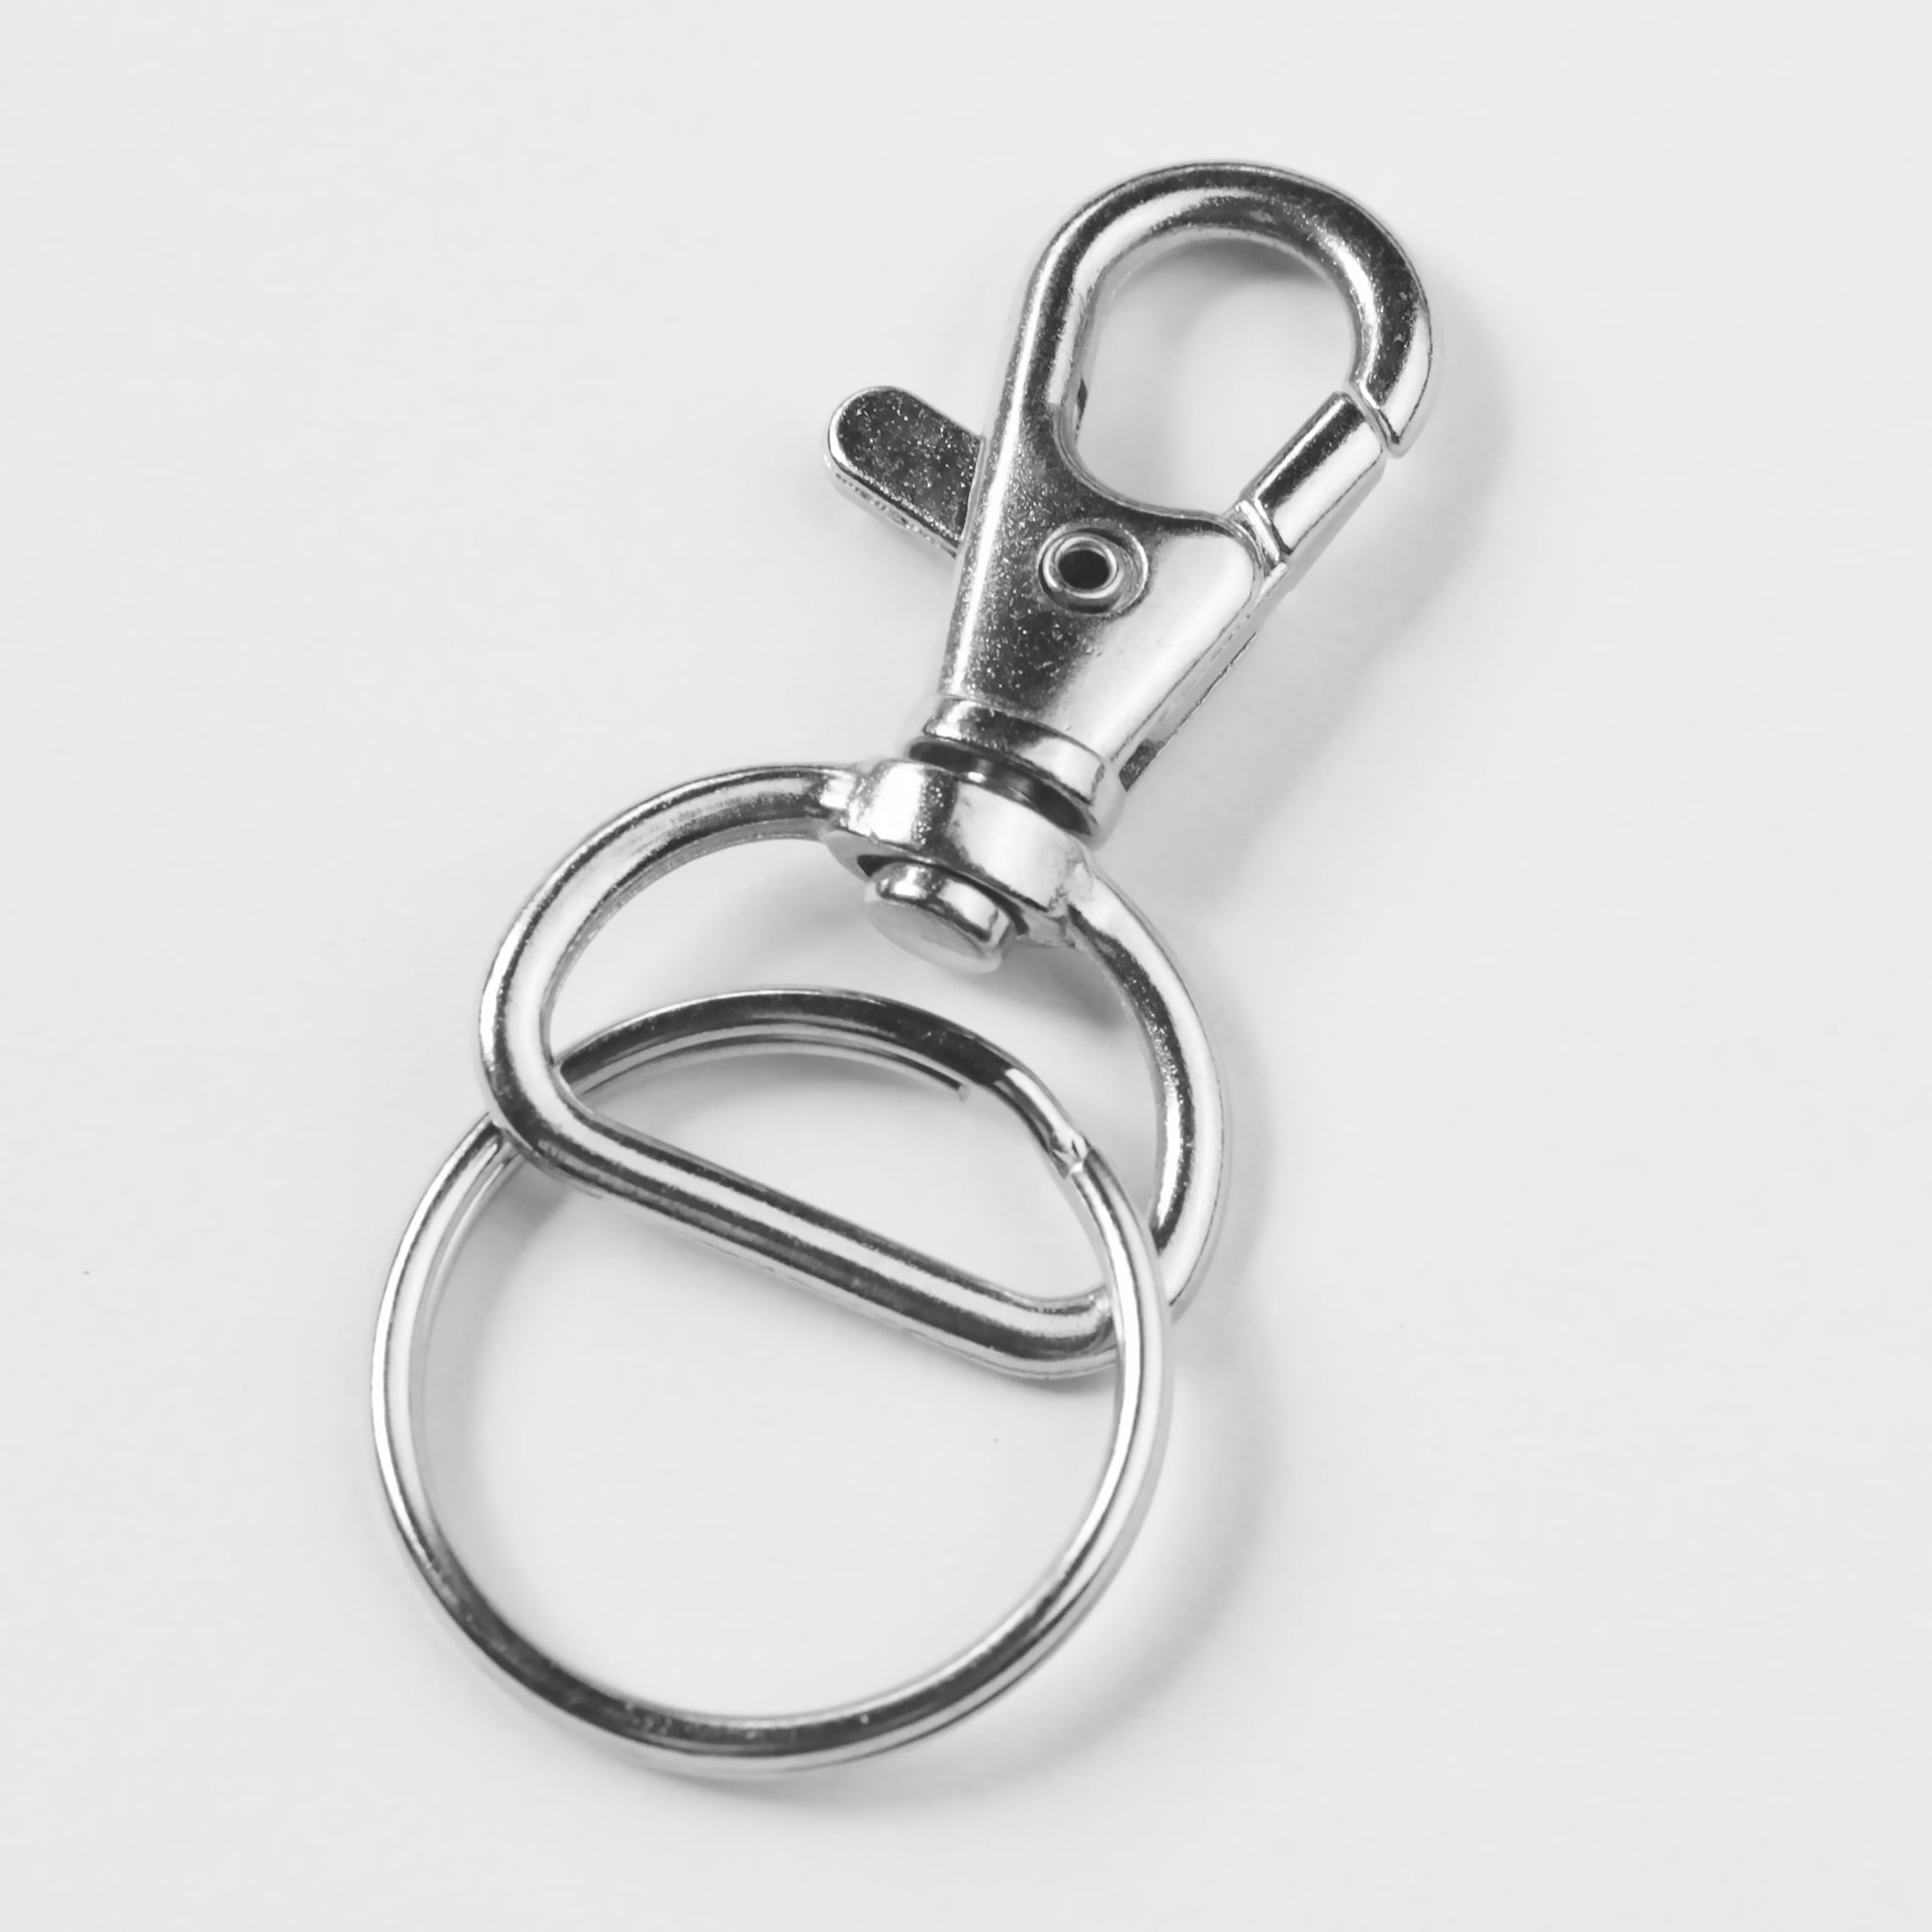 Zinc Metal Snap Hook Lobster Clasp Collar Buckles For DIY Keychains And  Bags 15/20/25/32mm/38mm Sizes Available From Kaniso, $5.53